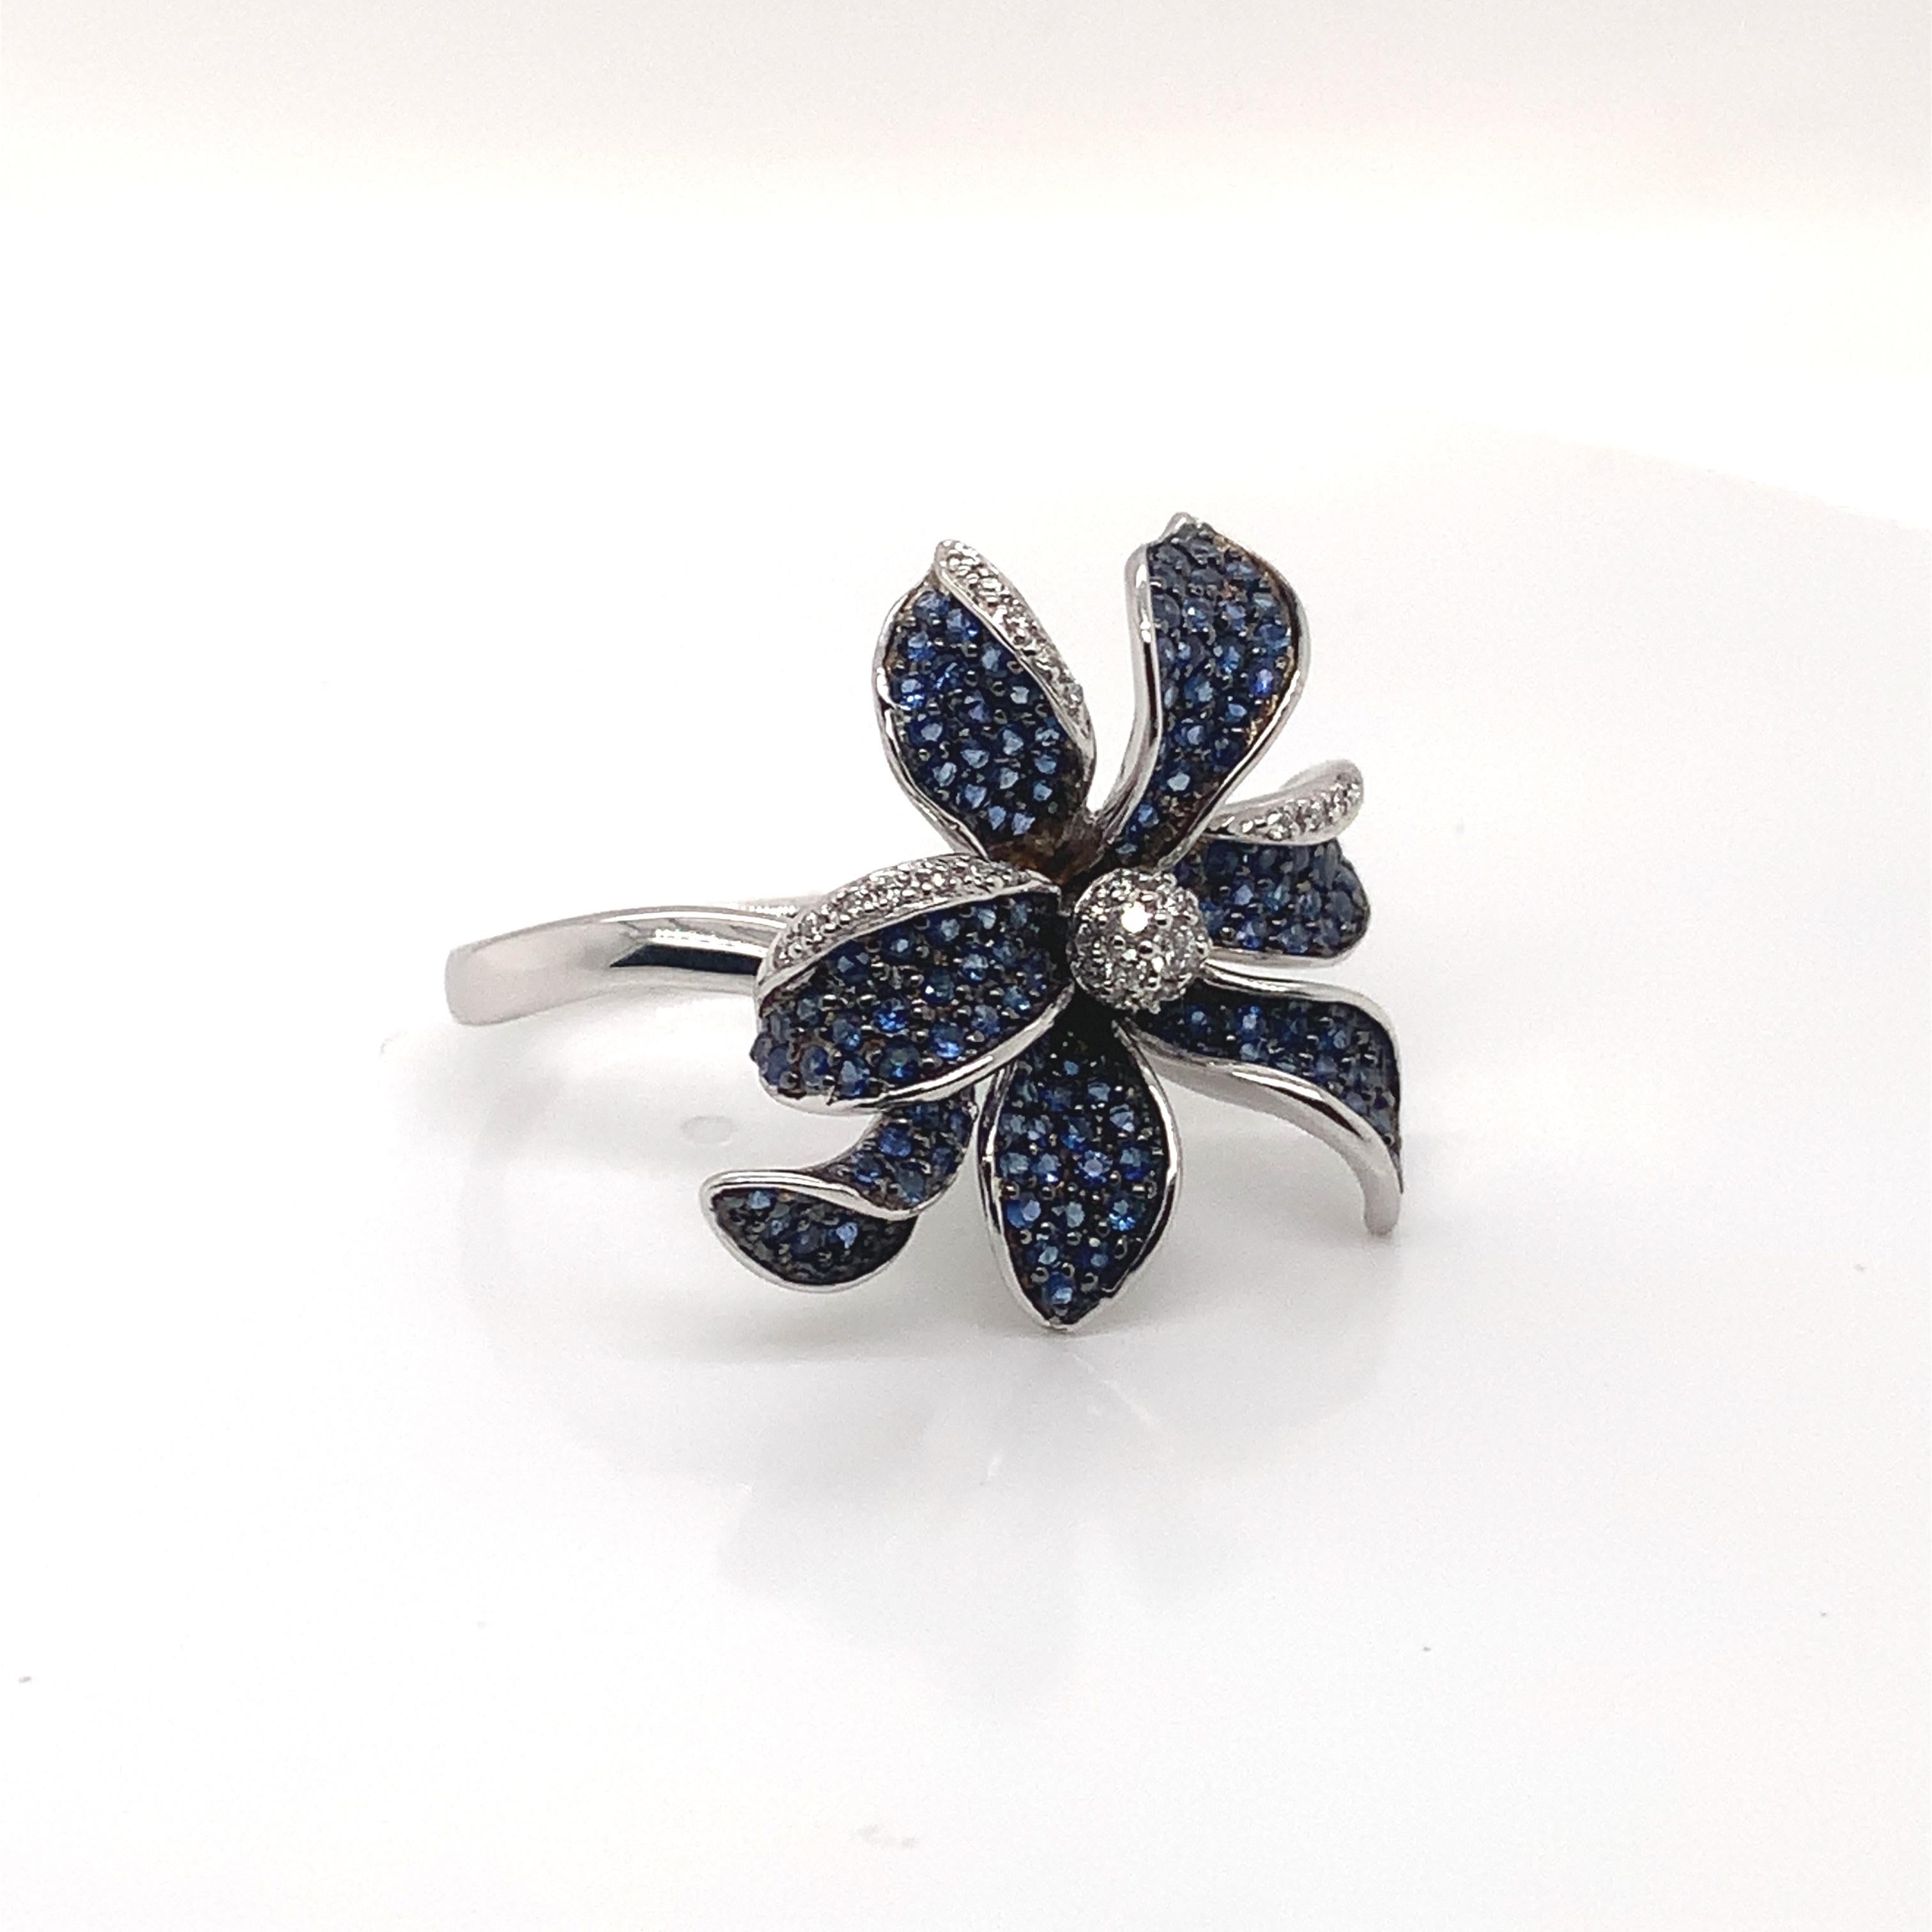 Floral 1.7 Carat Blue Sapphire and Diamond Ring in 14 Karat White Gold 1